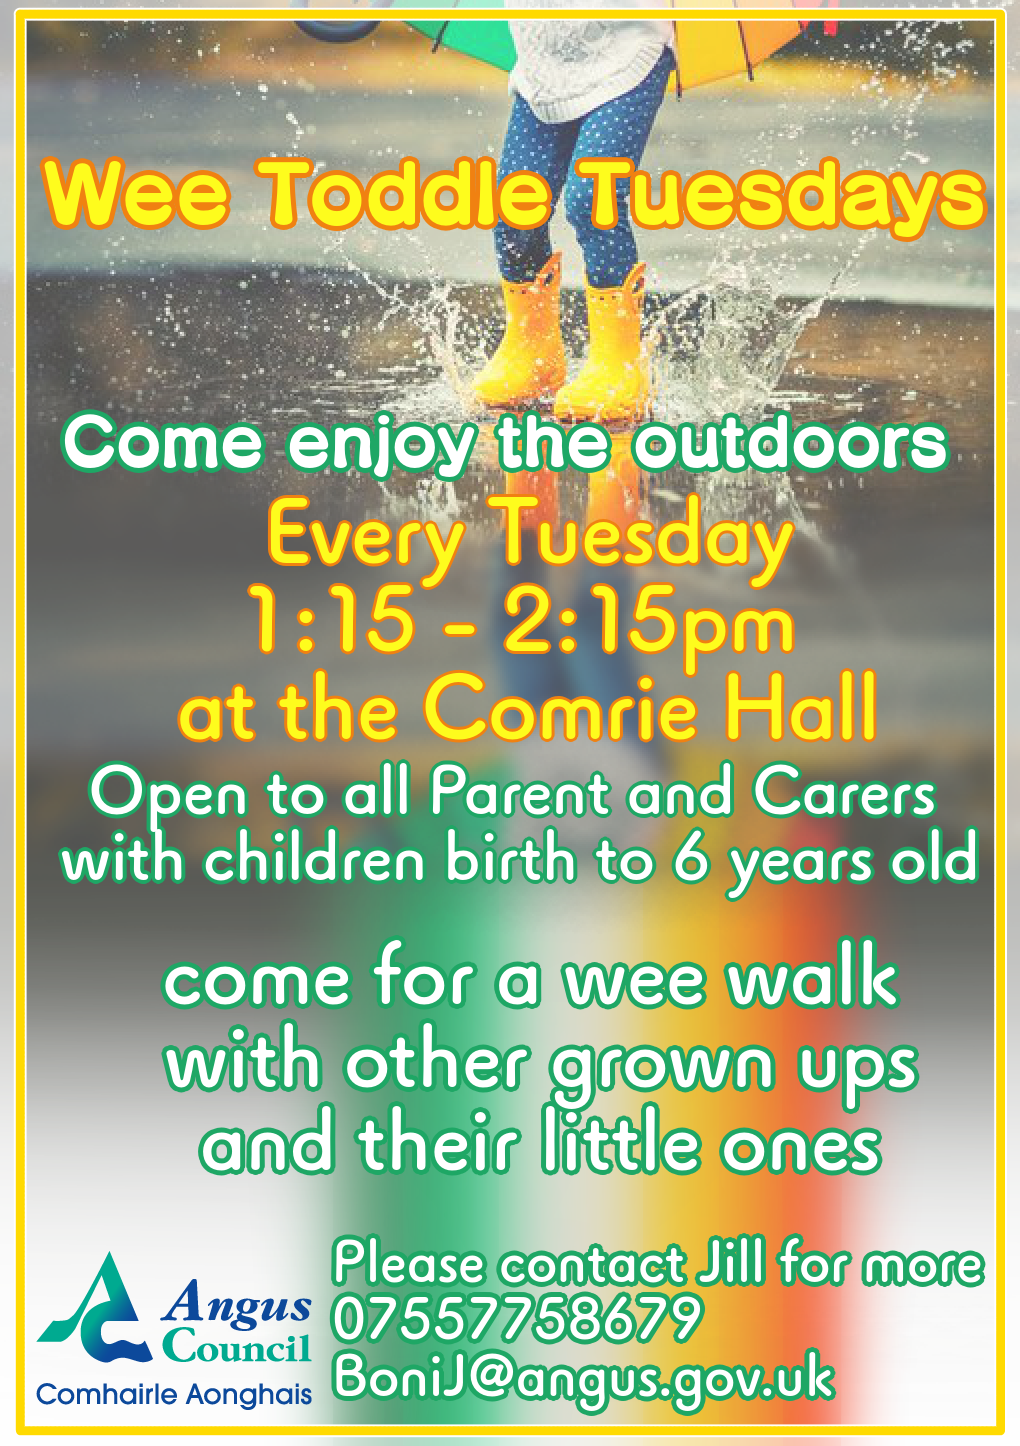 Wee Toddle Tuesdays Image